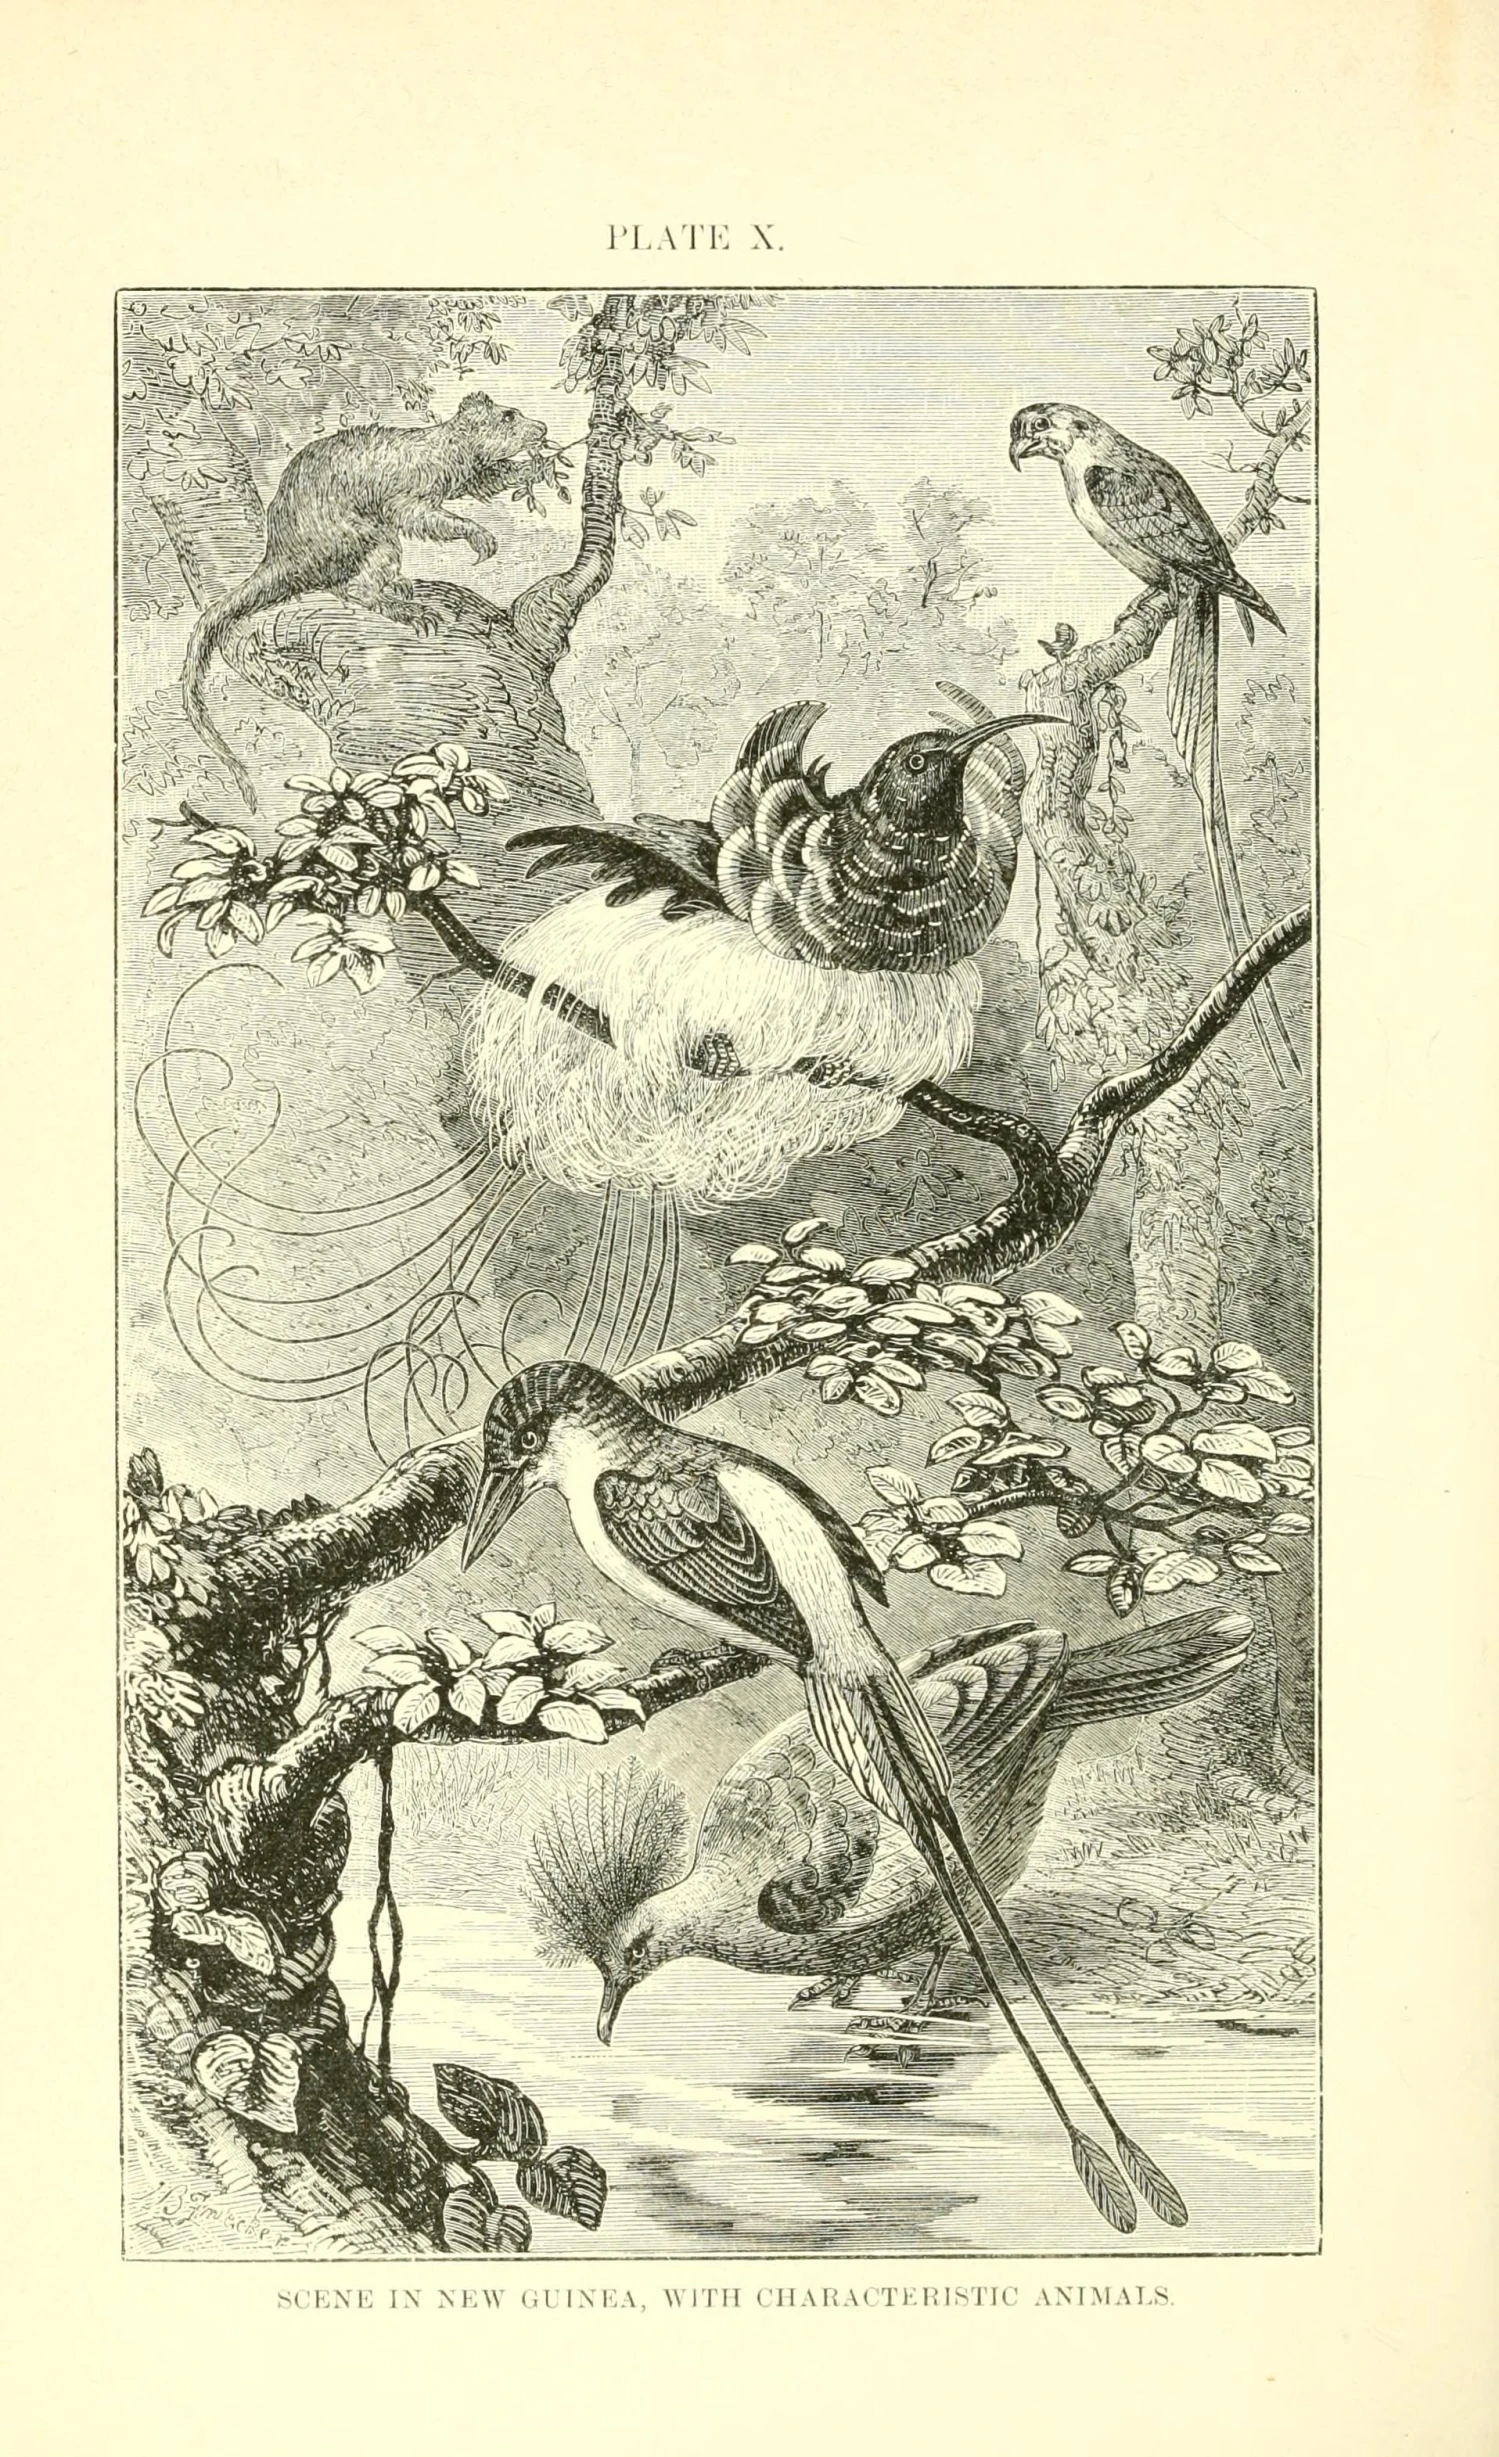 an old, black and white book cover with an illustration of birds on a tree nch